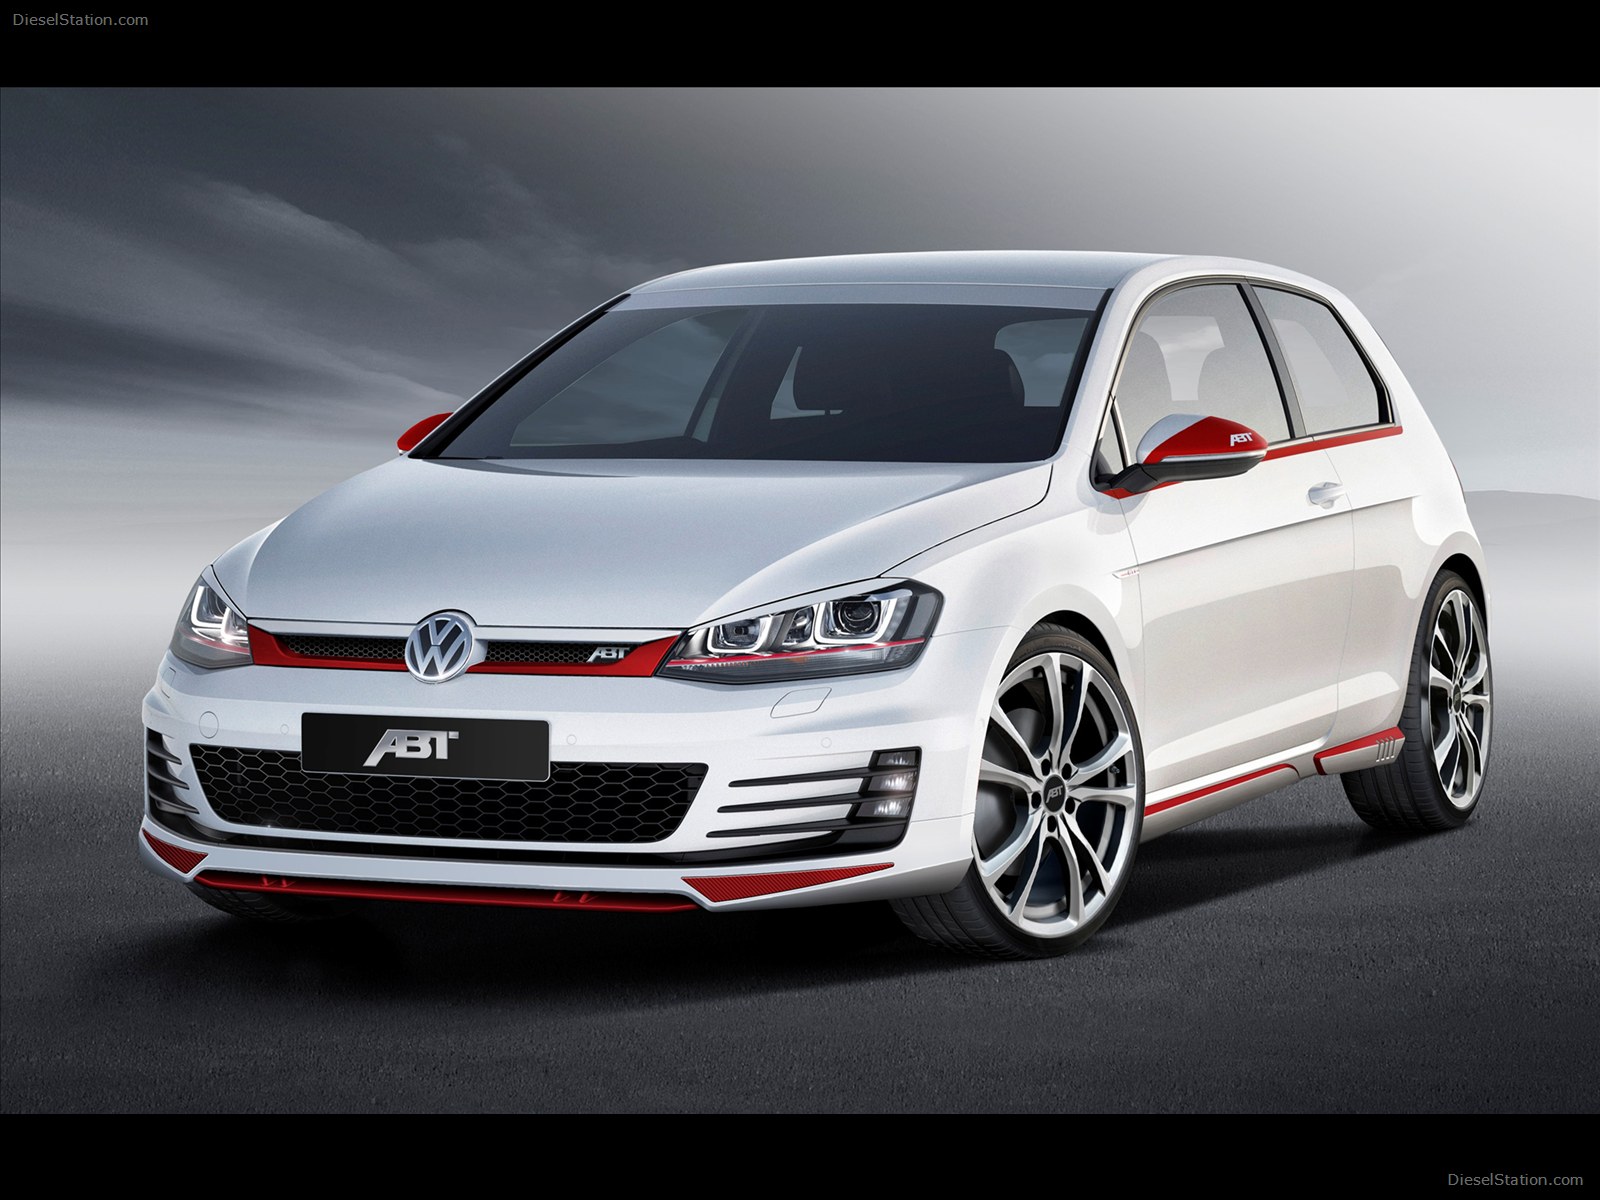 ABT VW Golf VII GTI 2013 Exotic Car Picture 01 of 4 Diesel Station 1600x1200